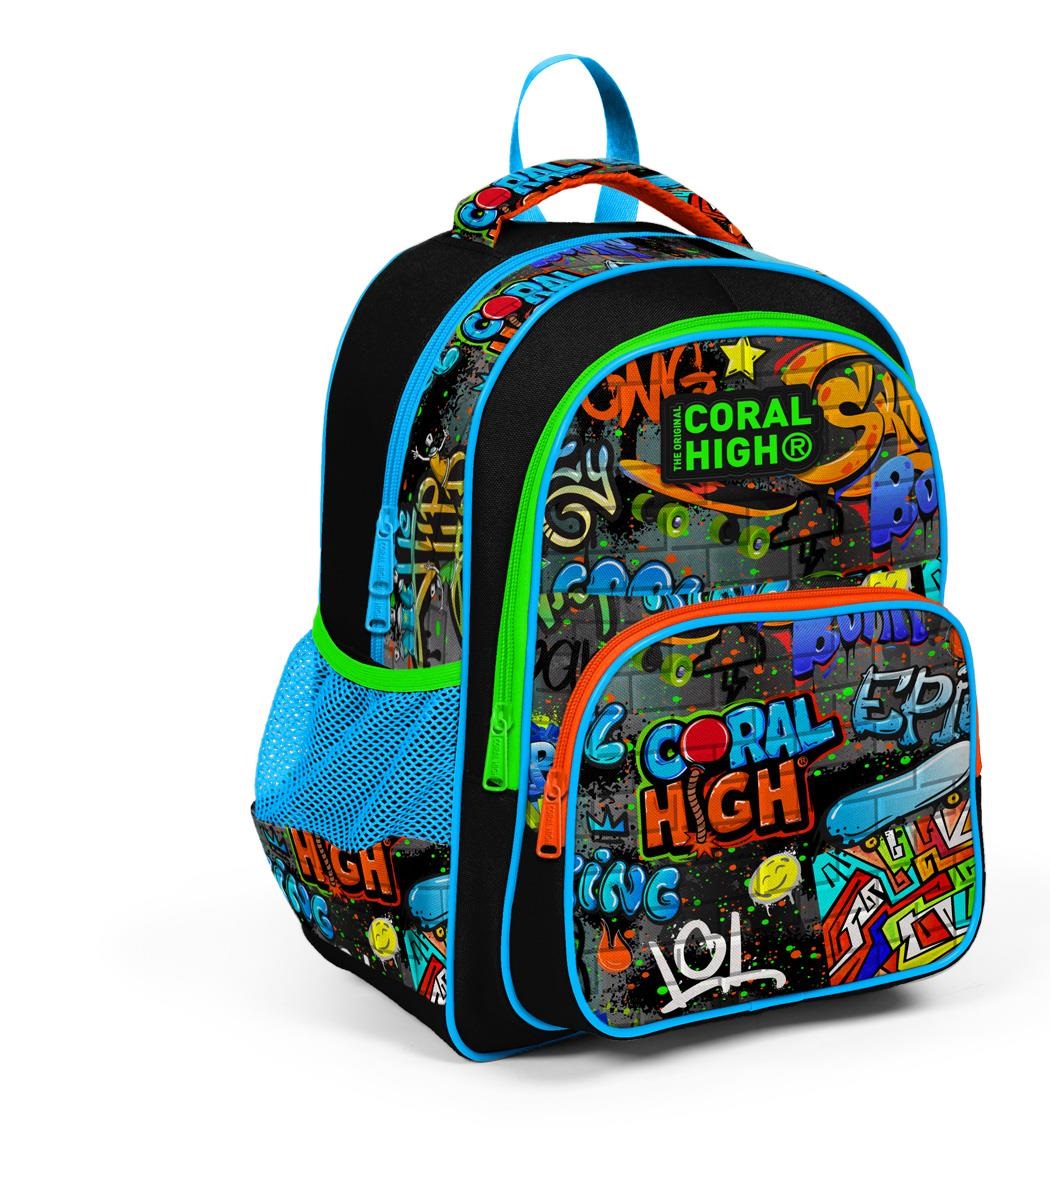 Coral High Kids Three Compartment School Backpack - Black Blue Graffiti Patterned